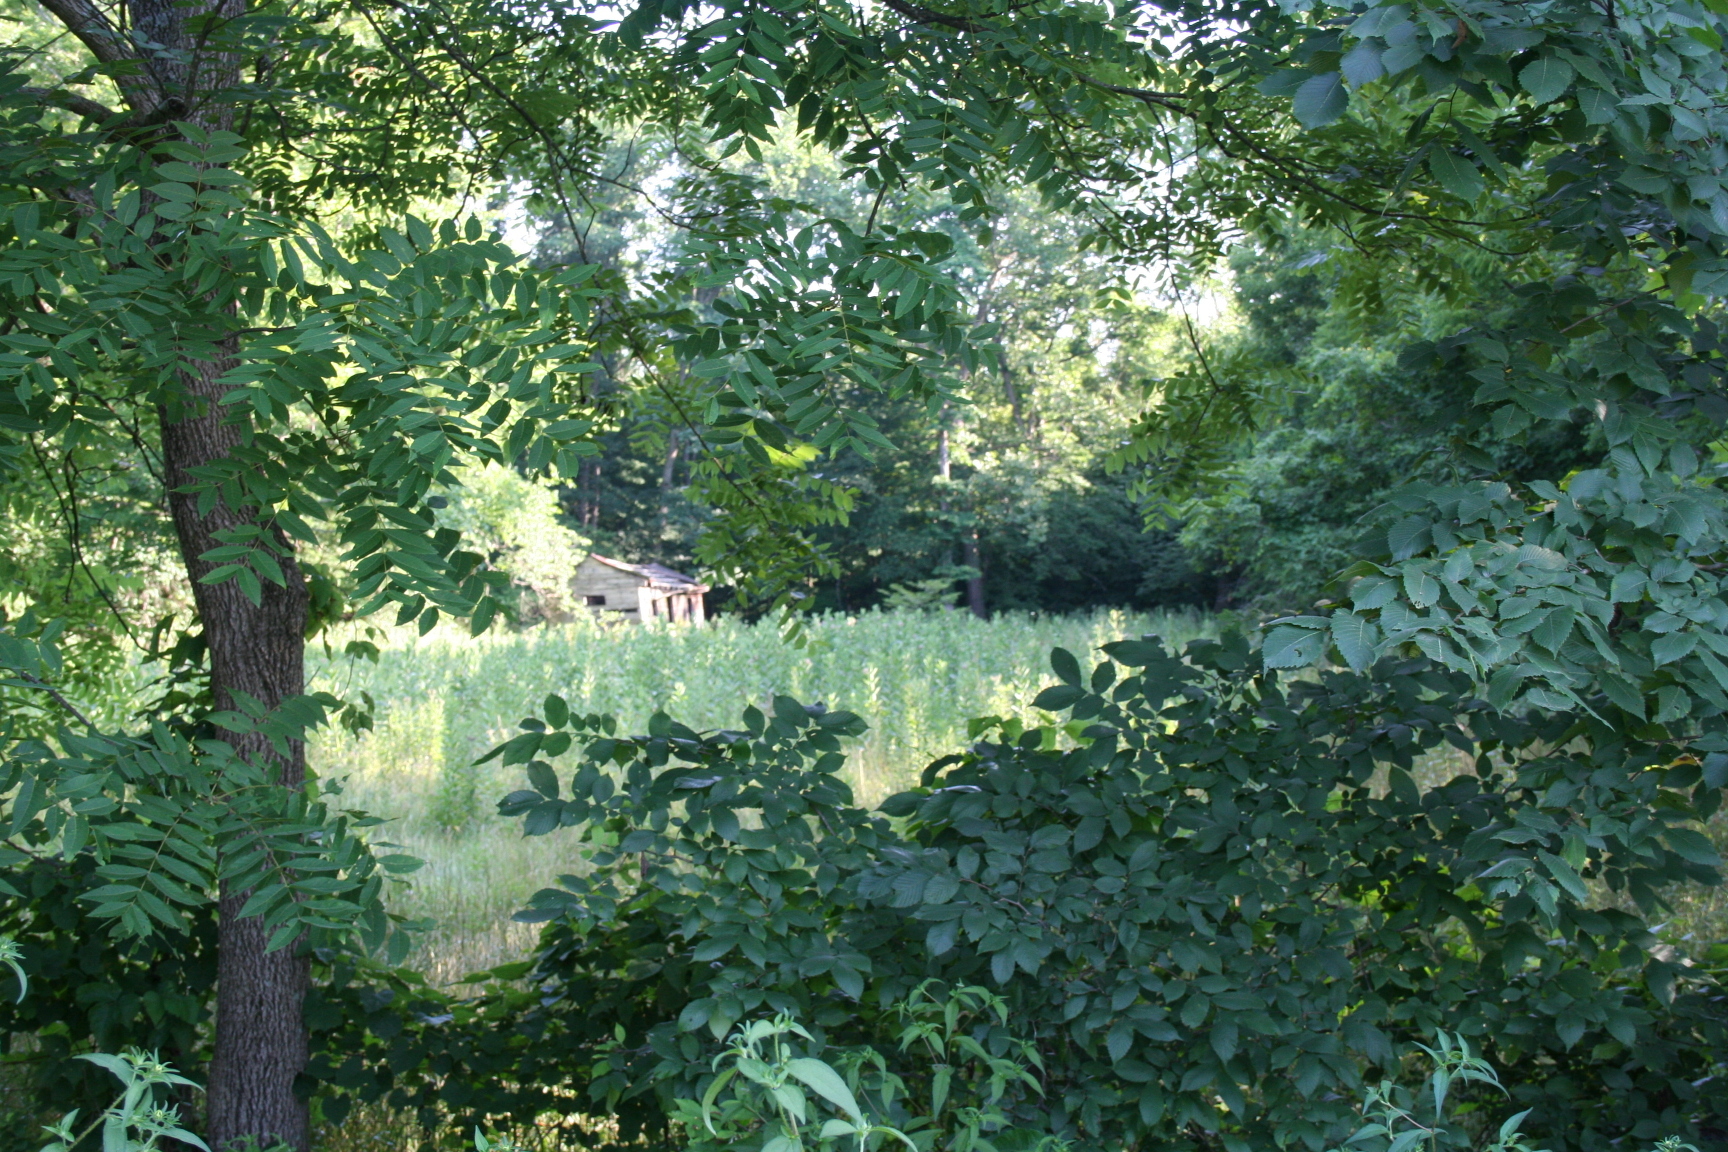 A view through the trees of a cabin structure in the Mark Twain National Forest in Washington County, Missouri